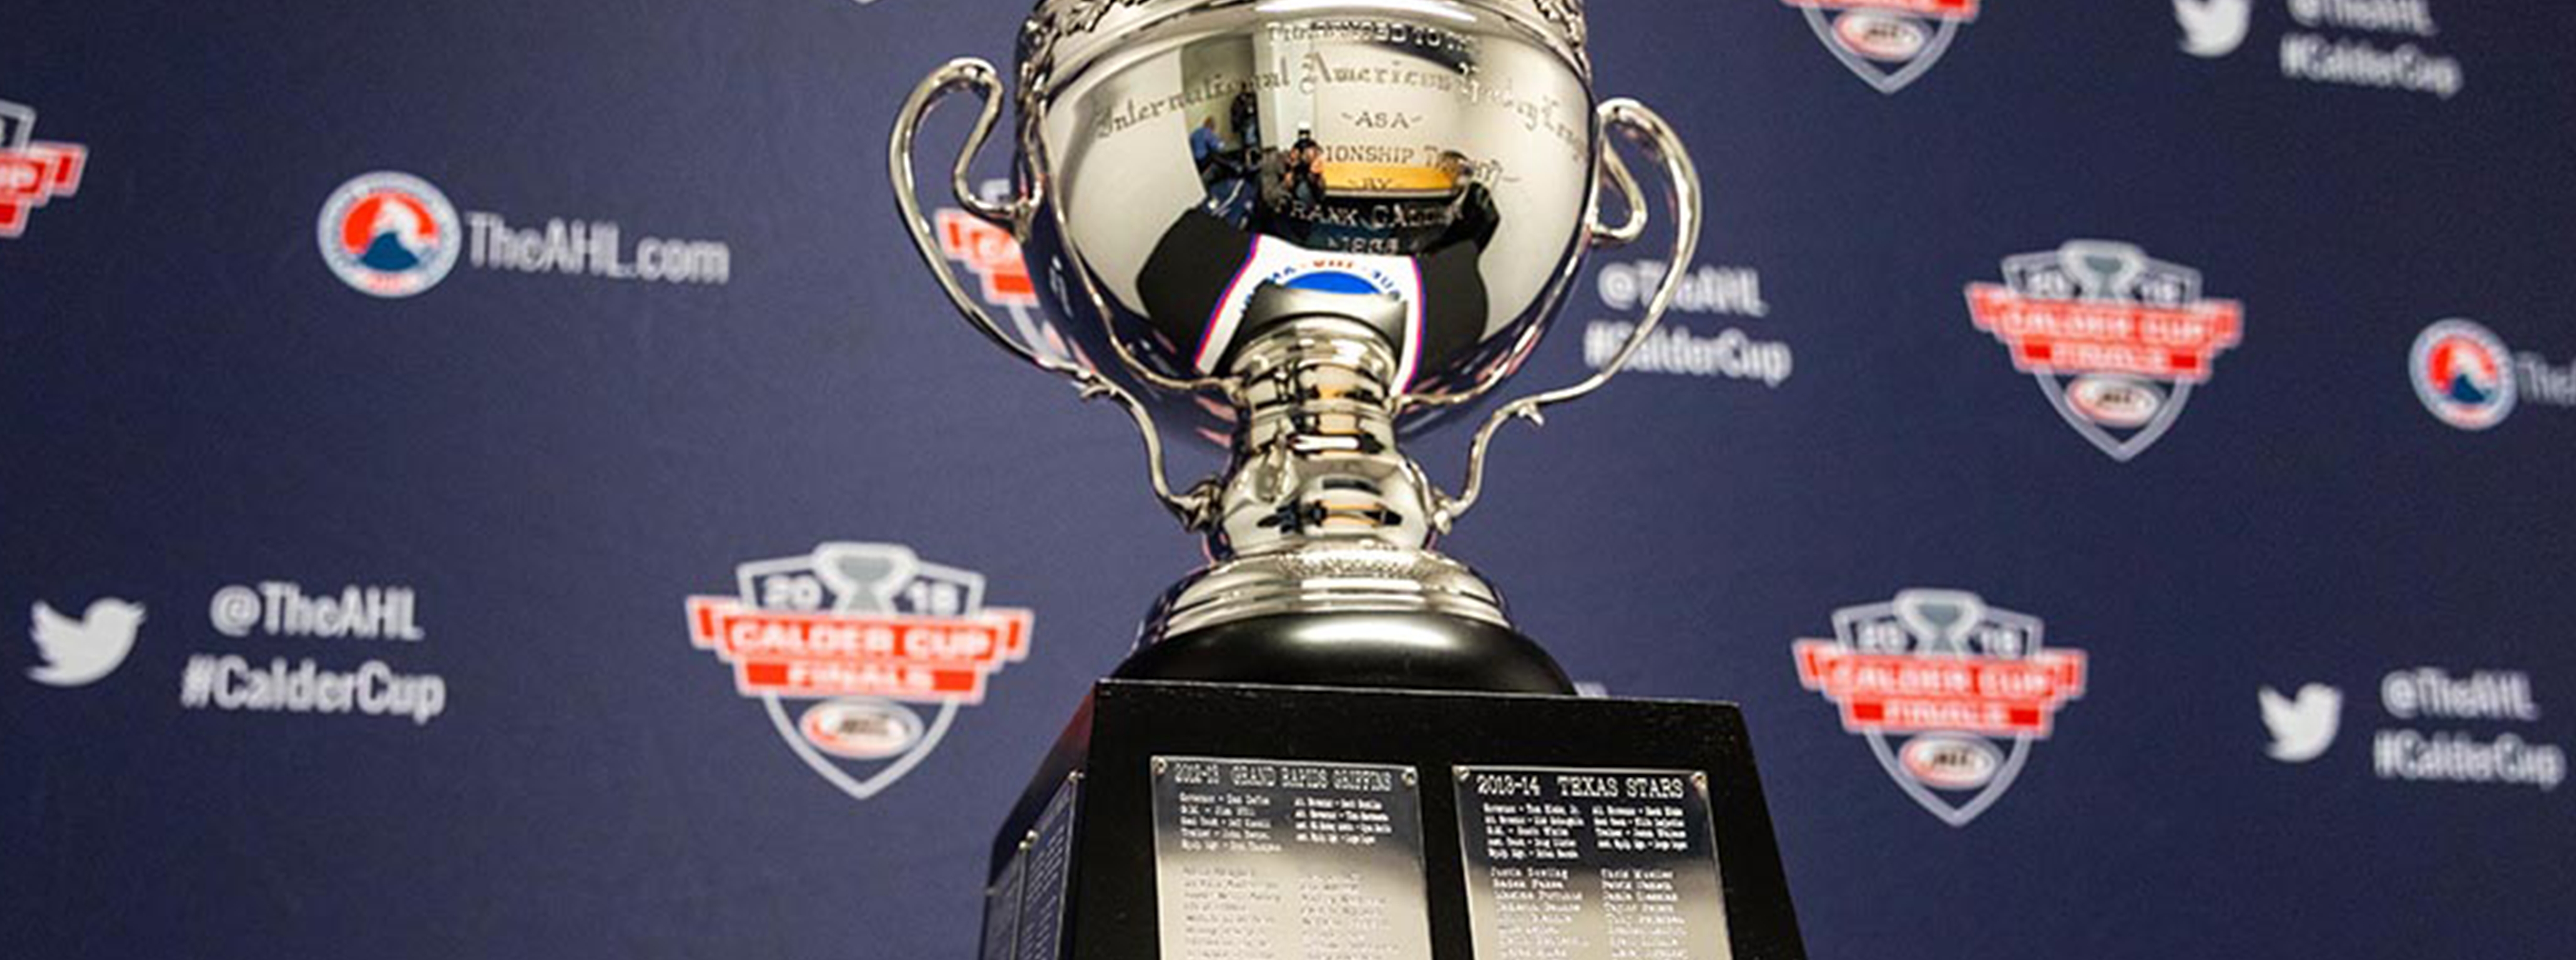 New Qualification Rules, Format for Calder Cup Playoffs